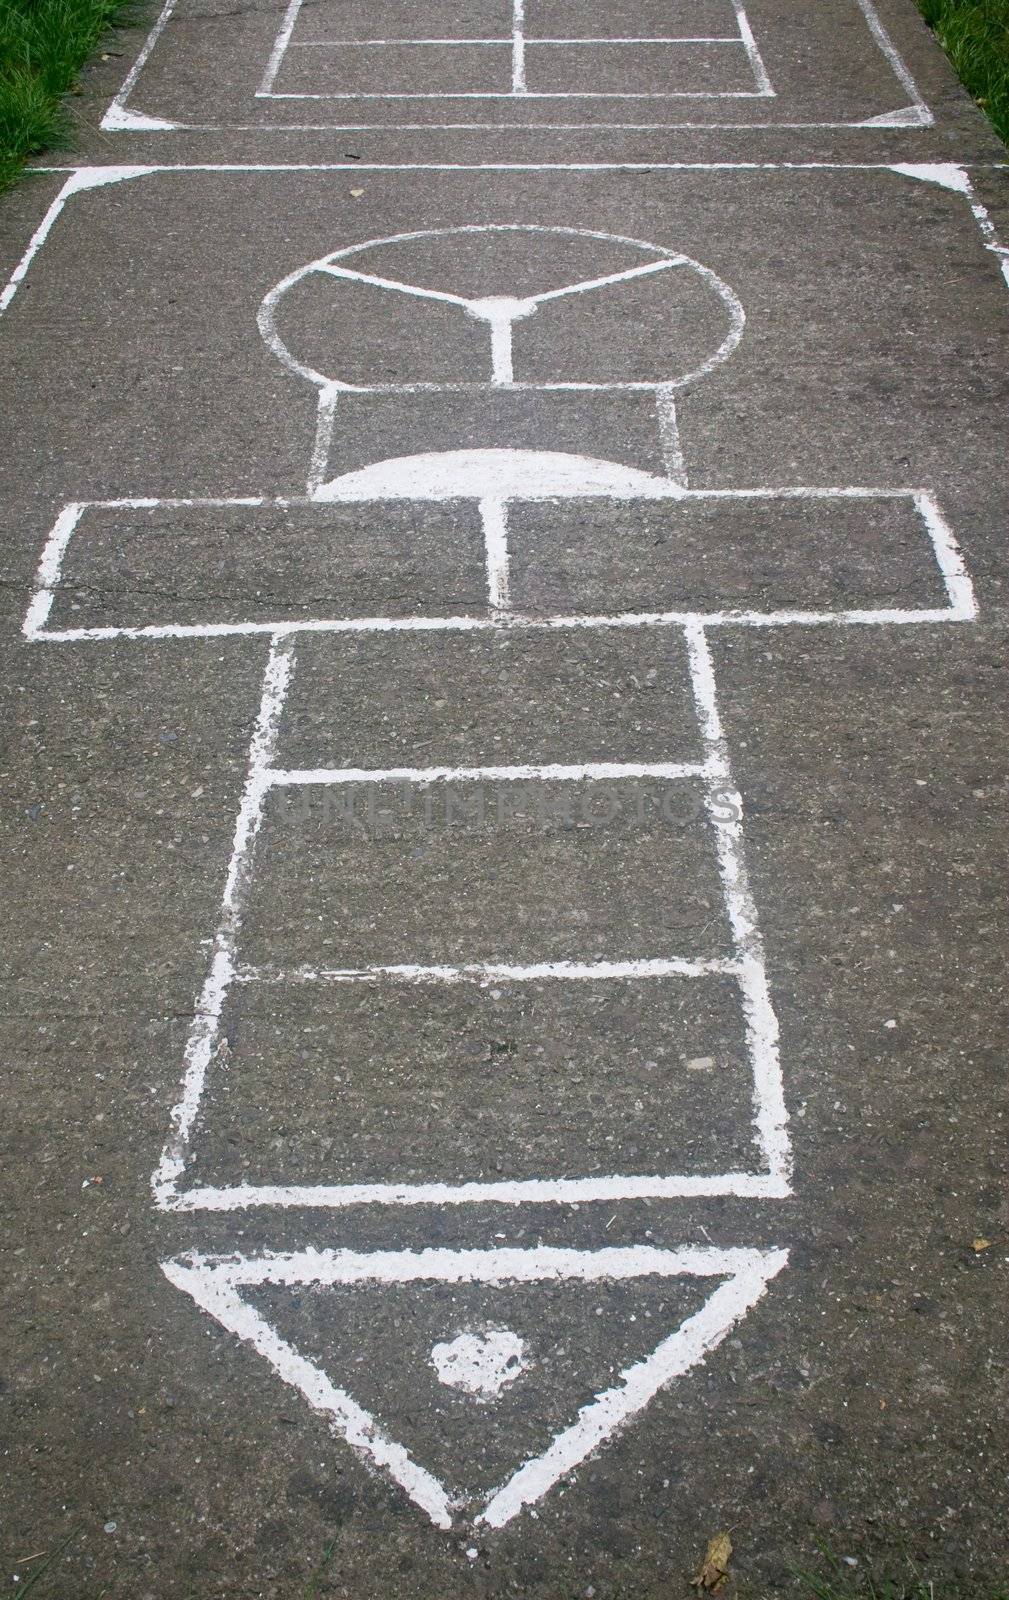 Hopscotch by timscottrom